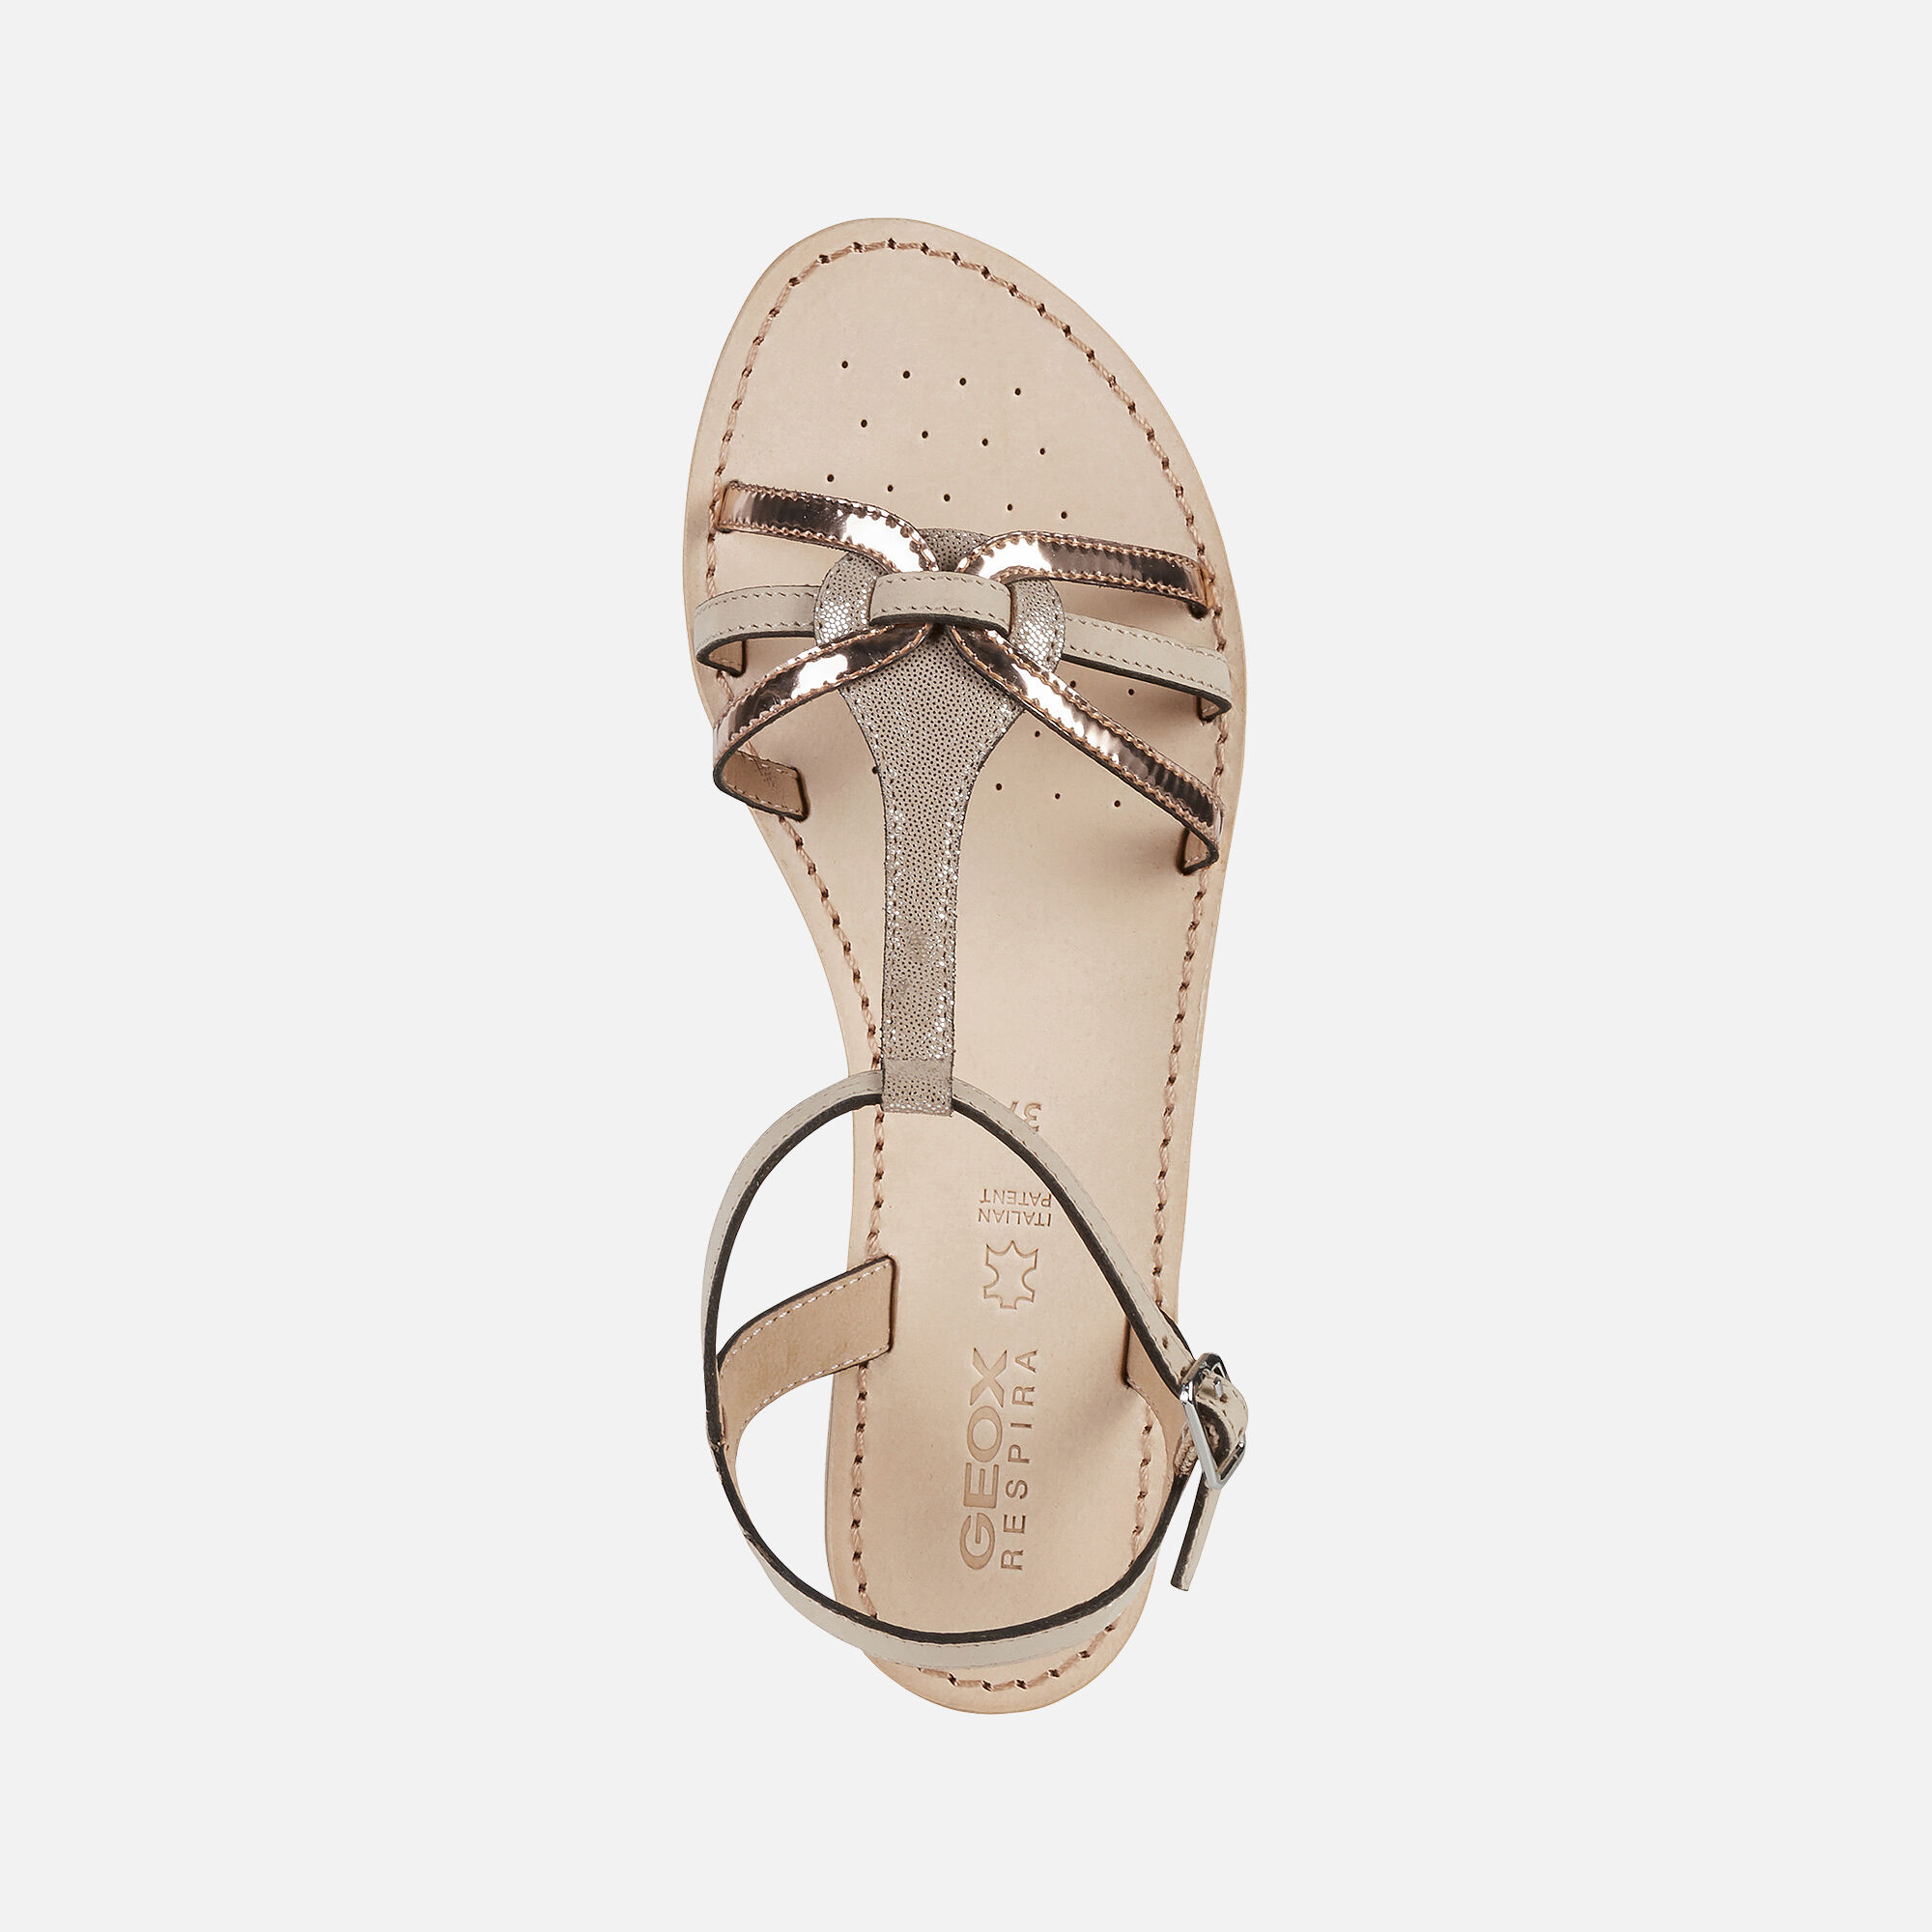 Geox SOZY Woman: Lt Taupe Sandals 